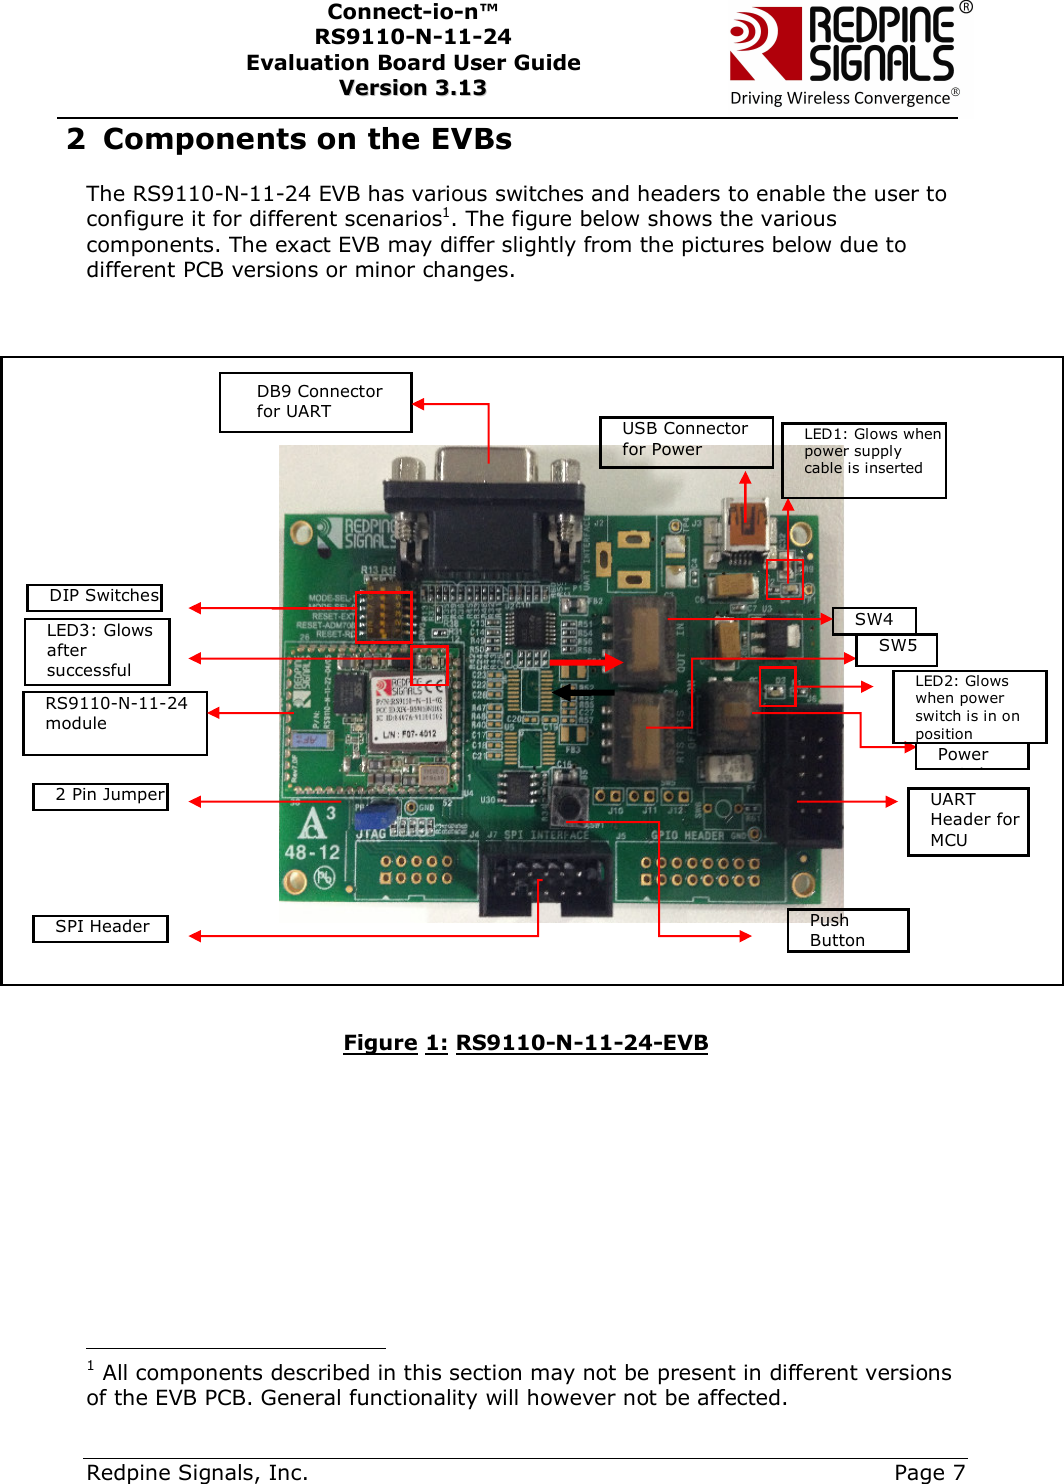      Redpine Signals, Inc.     Page 7 Connect-io-n™ RS9110-N-11-24  Evaluation Board User Guide  VVeerrssiioonn  33..1133    2 Components on the EVBs The RS9110-N-11-24 EVB has various switches and headers to enable the user to configure it for different scenarios1. The figure below shows the various components. The exact EVB may differ slightly from the pictures below due to different PCB versions or minor changes.                 Figure 1: RS9110-N-11-24-EVB                                                   1 All components described in this section may not be present in different versions of the EVB PCB. General functionality will however not be affected. DB9 Connector for UART RS9110-N-11-24  module DIP Switches SW4 Power switch SW5 USB Connector for Power  SPI Header 2 Pin Jumper UART Header for MCU LED1: Glows when power supply cable is inserted LED2: Glows when power switch is in on position LED3: Glows after successful boot-up Push Button  